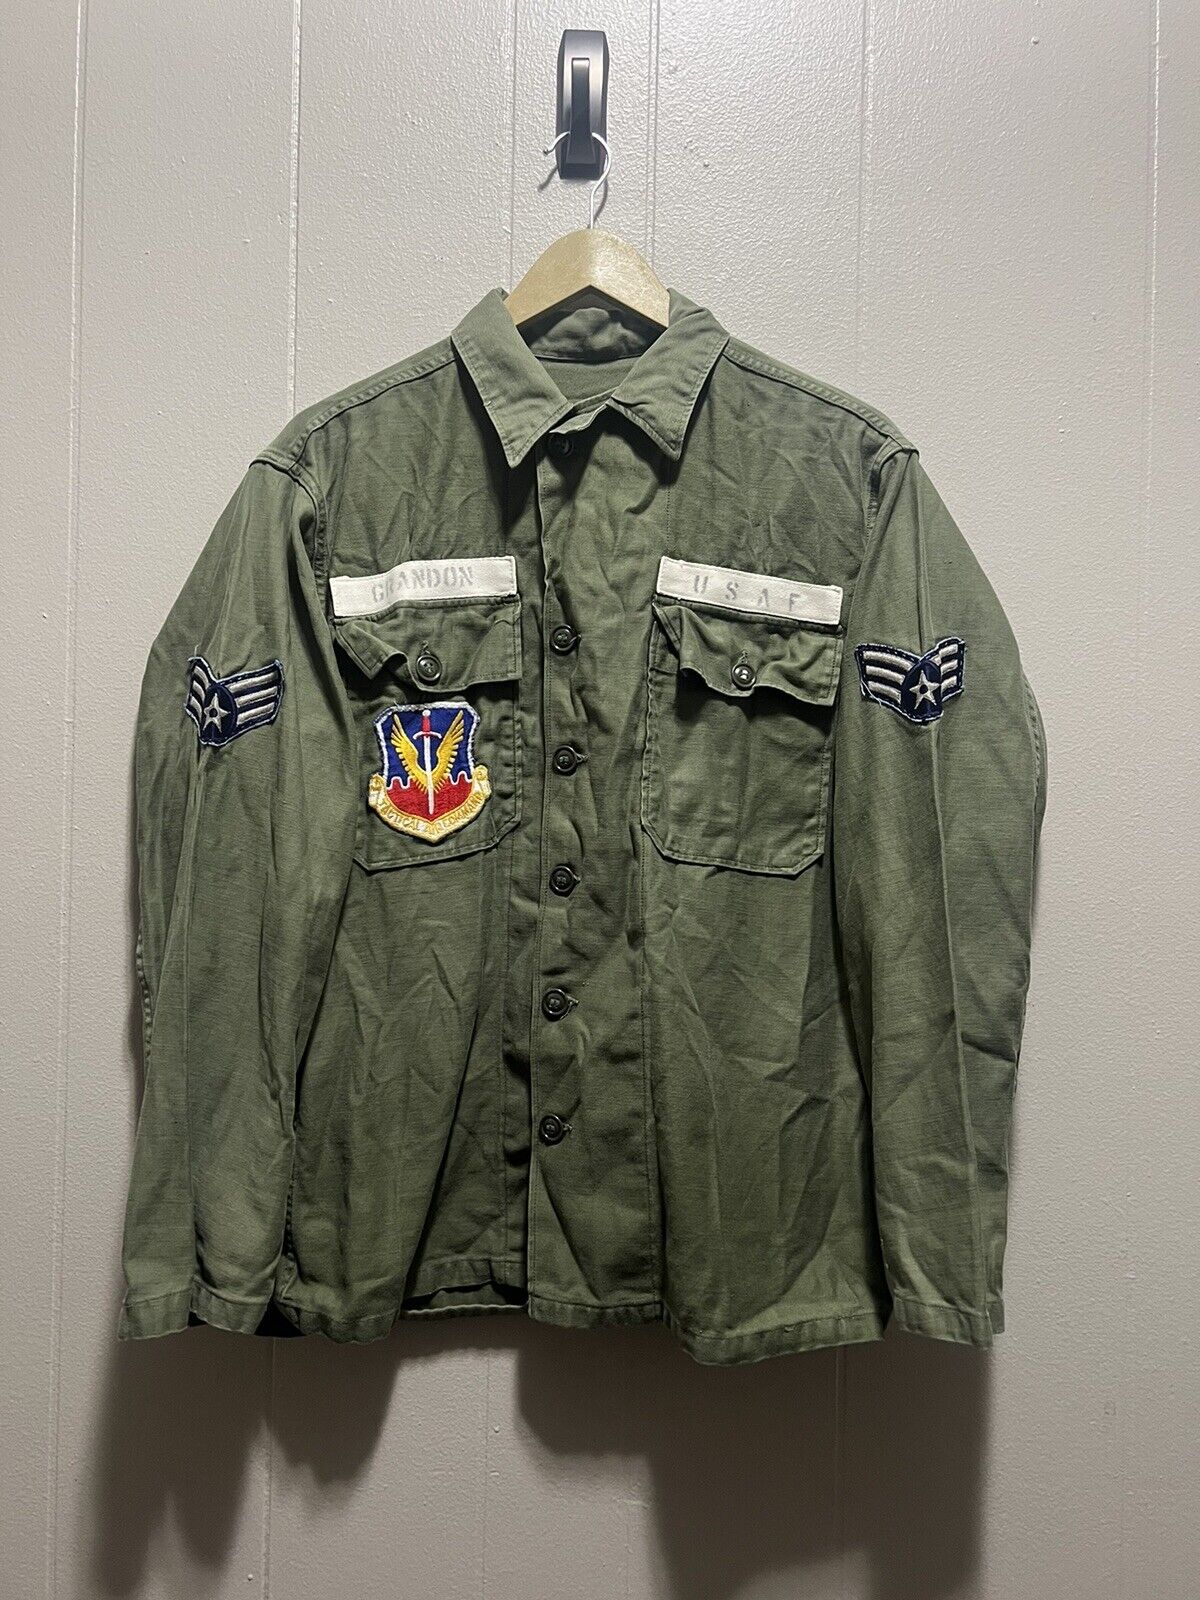 VTG OG 107 Shirt Military Fatigue Utility USAF Air Tactical Command 70s Patches